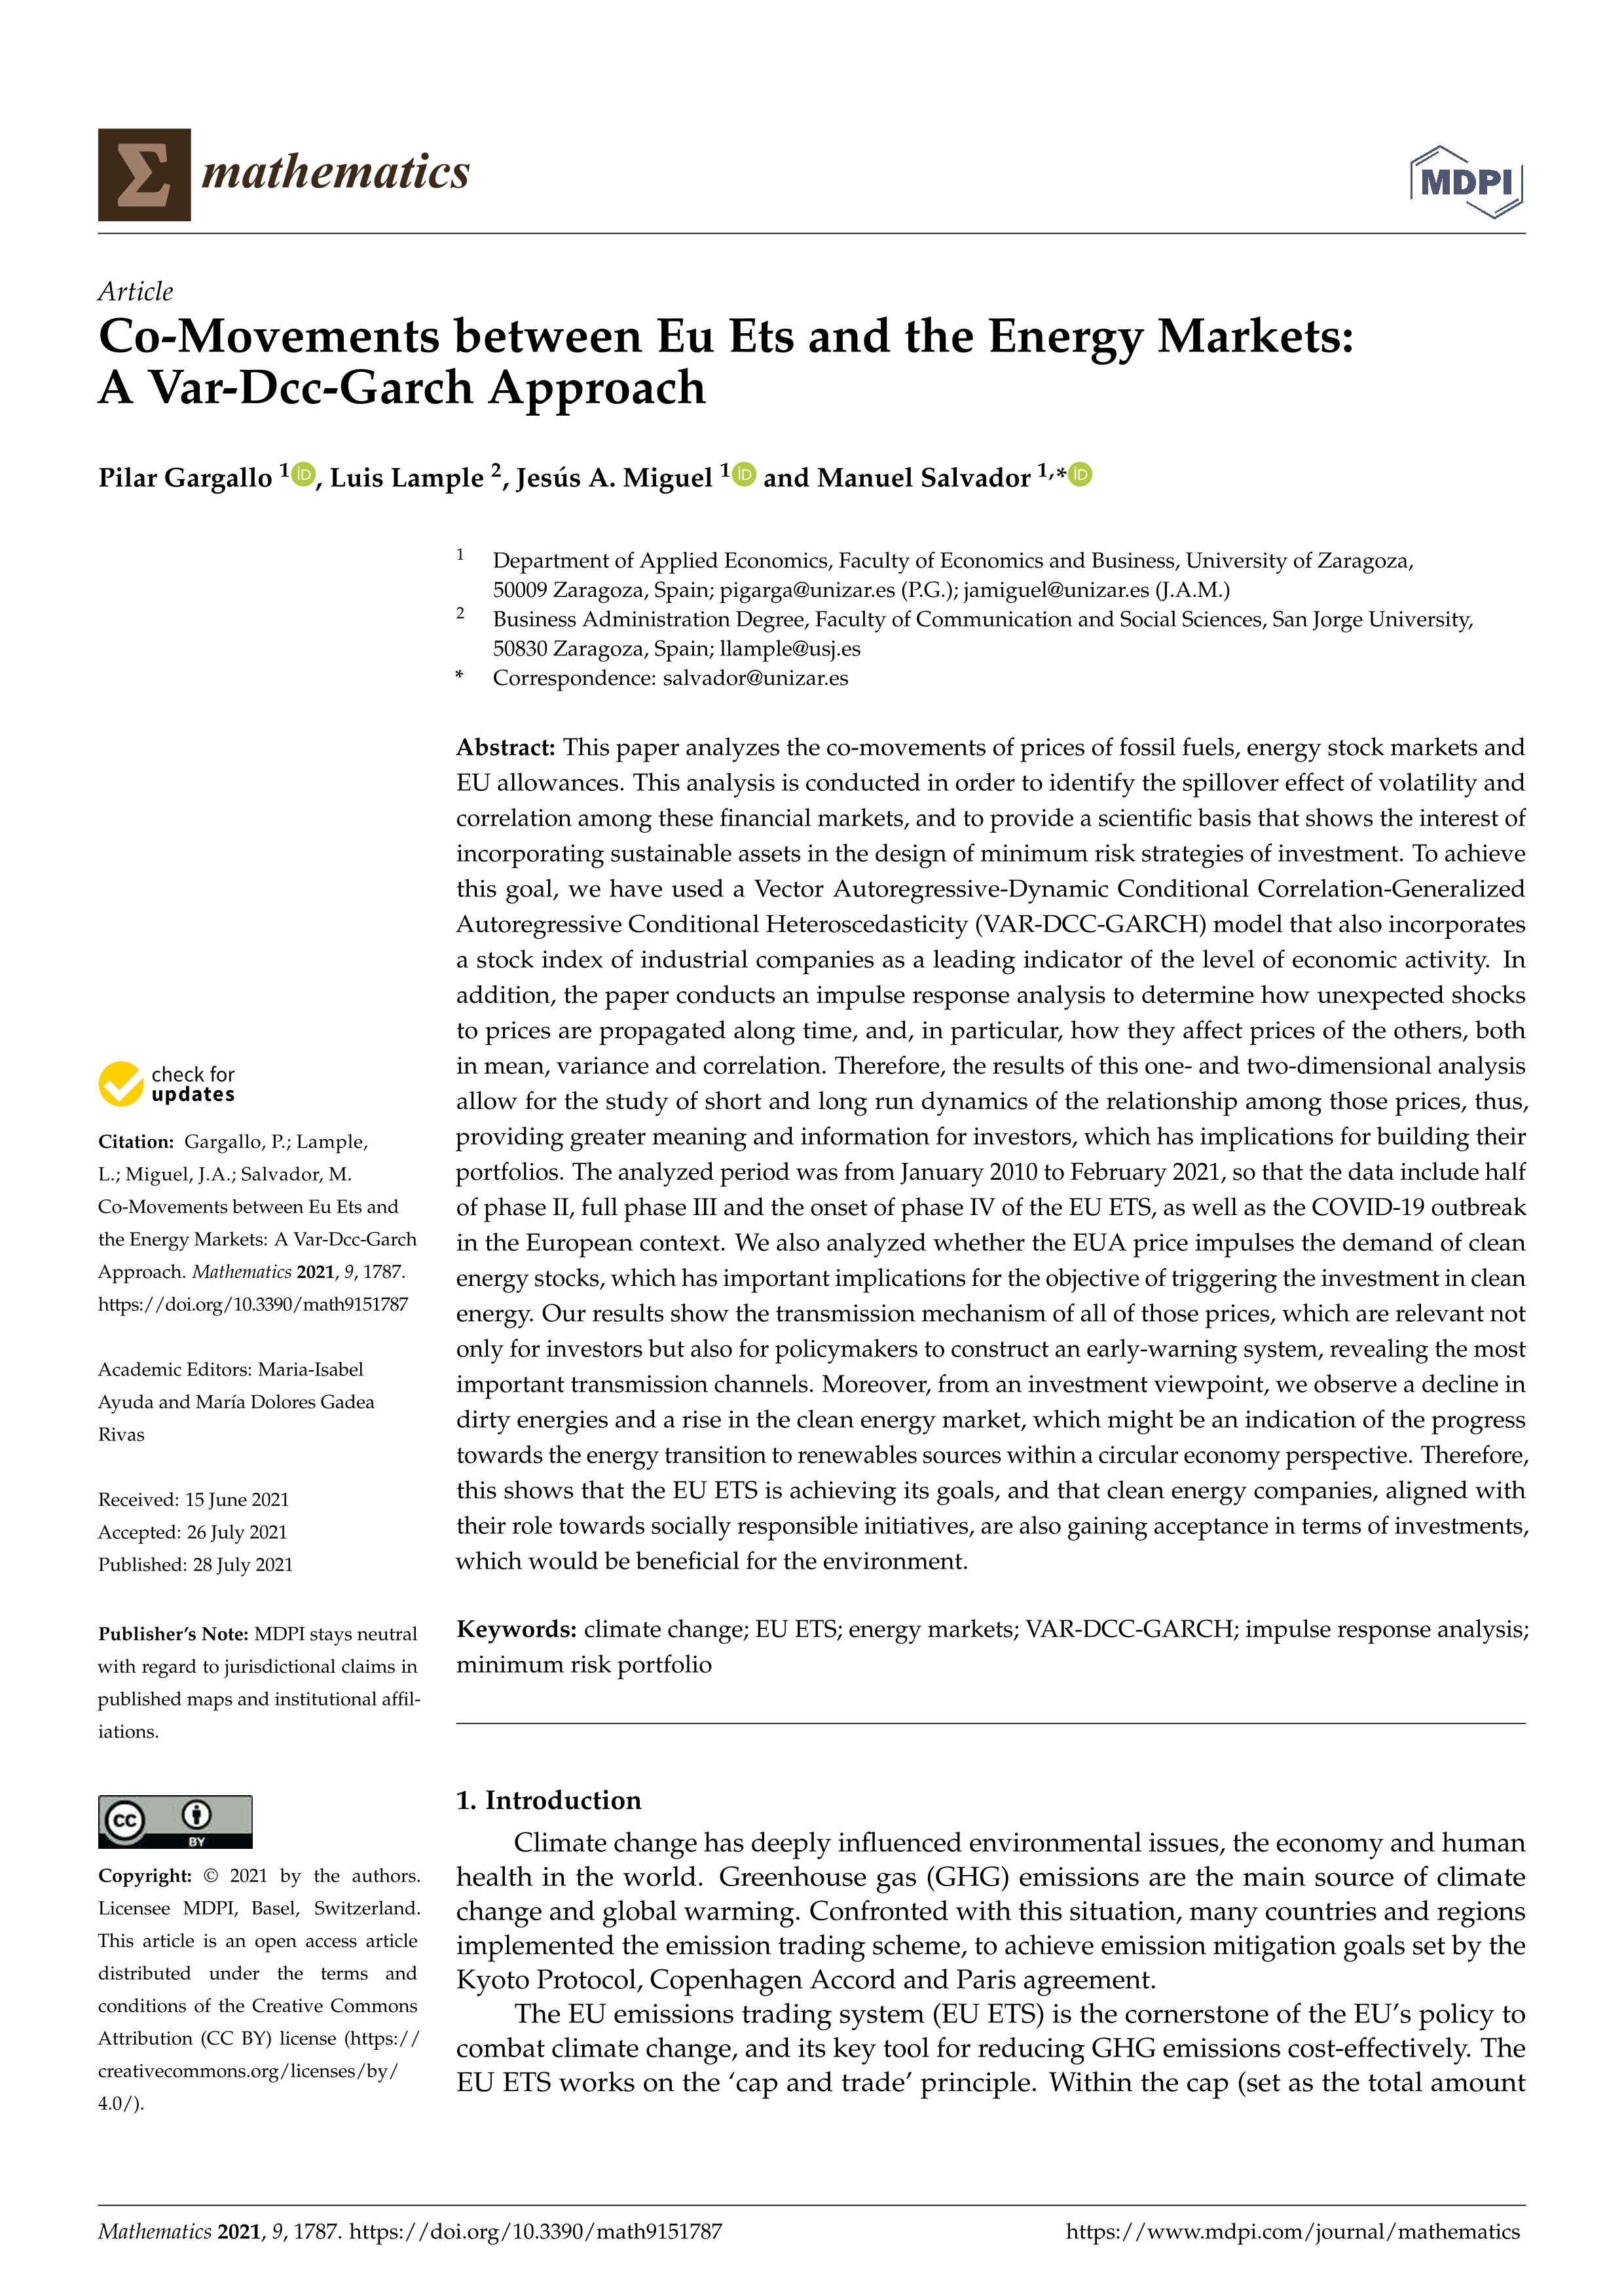 Co-movements between eu ets and the energy markets: A var-dcc-garch approach